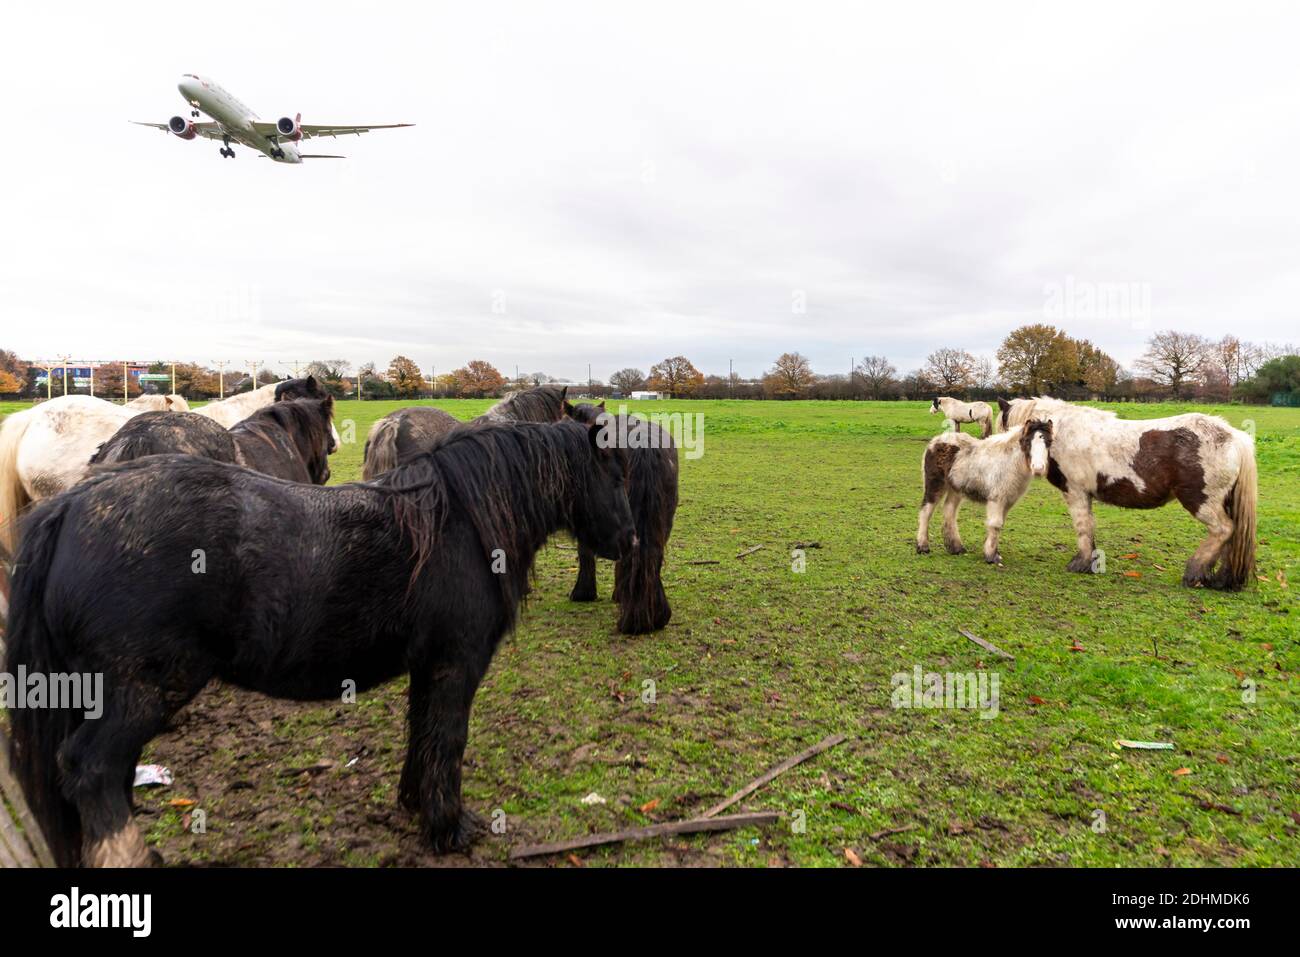 Unkempt horses in a field under the approach of jet airliner plane landing at London Heathrow Airport, UK. Bedraggled wet livestock on waste ground Stock Photo